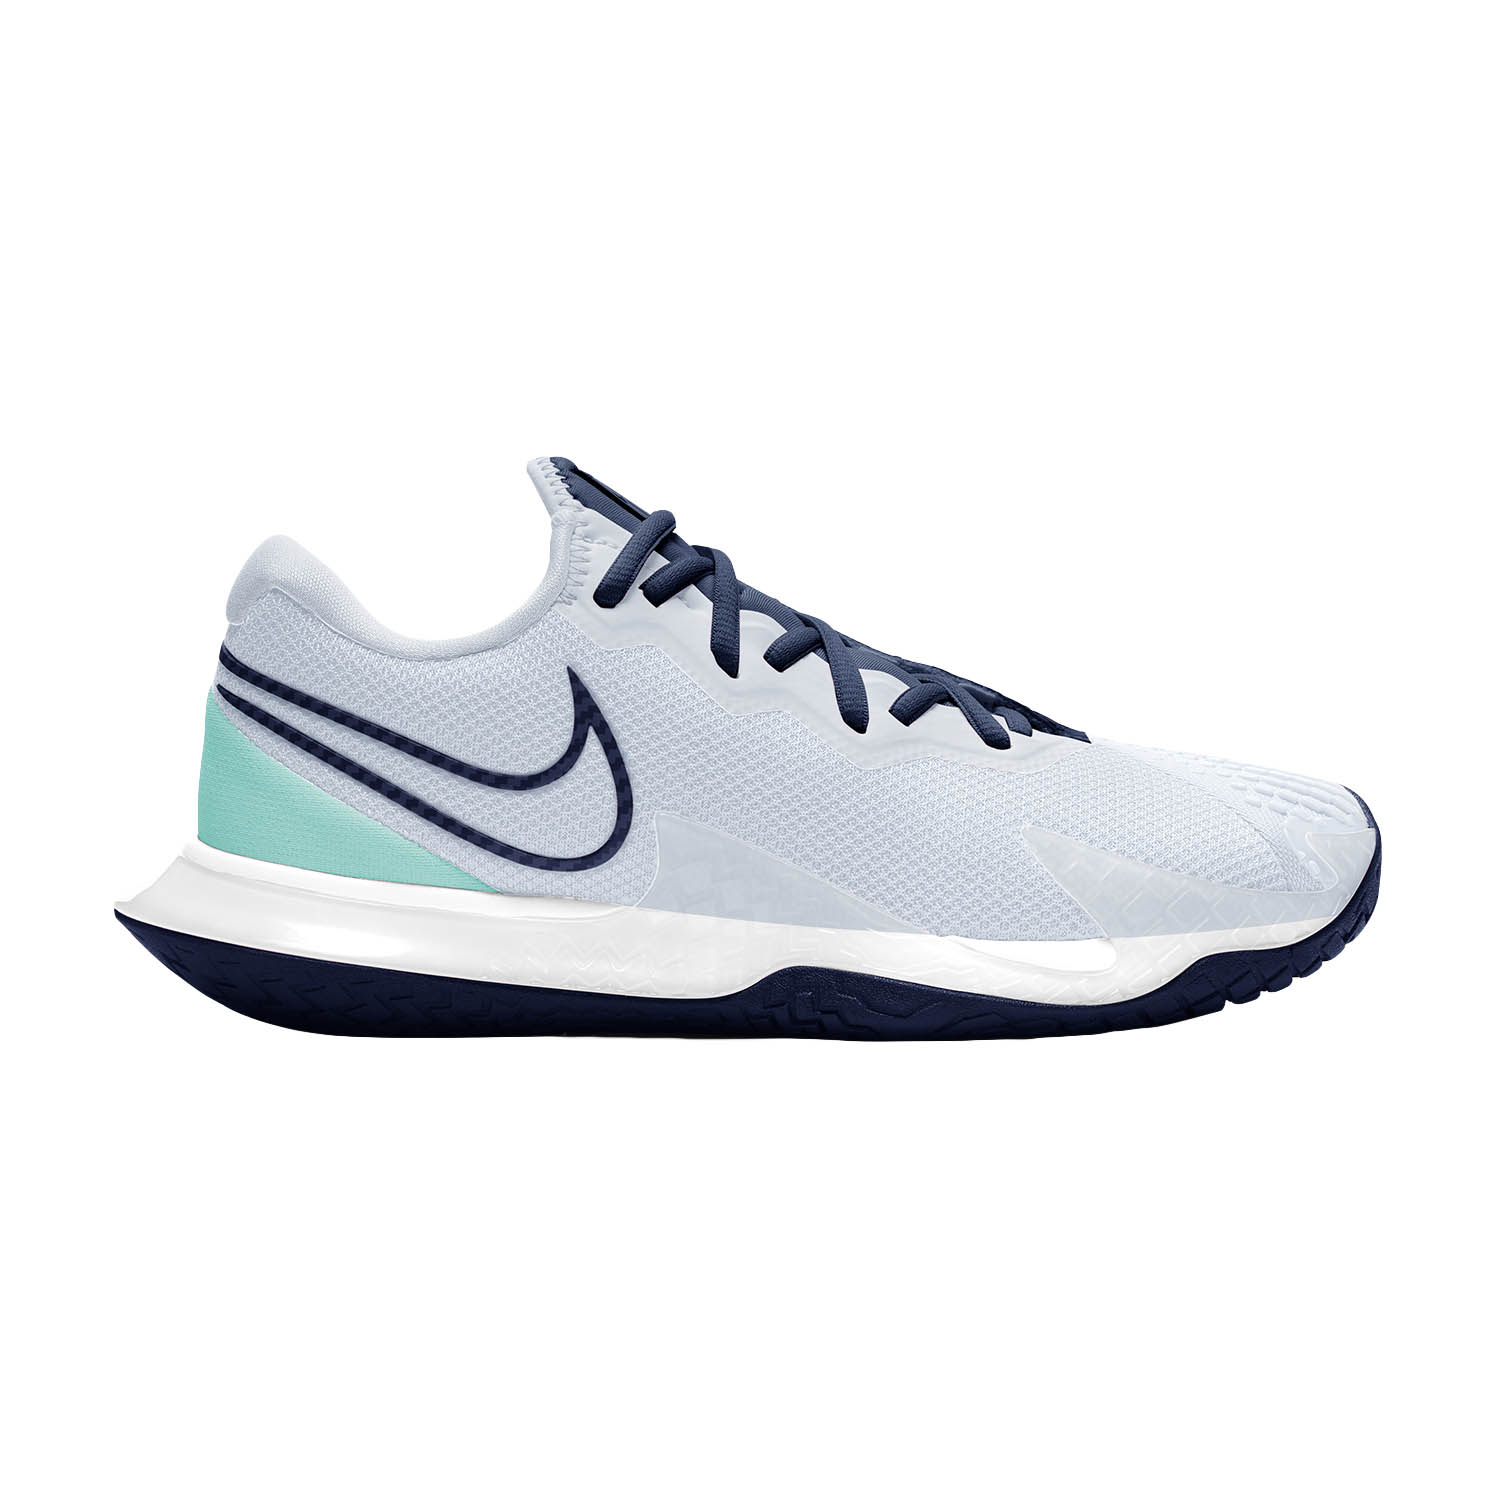 nike cage tennis shoes womens